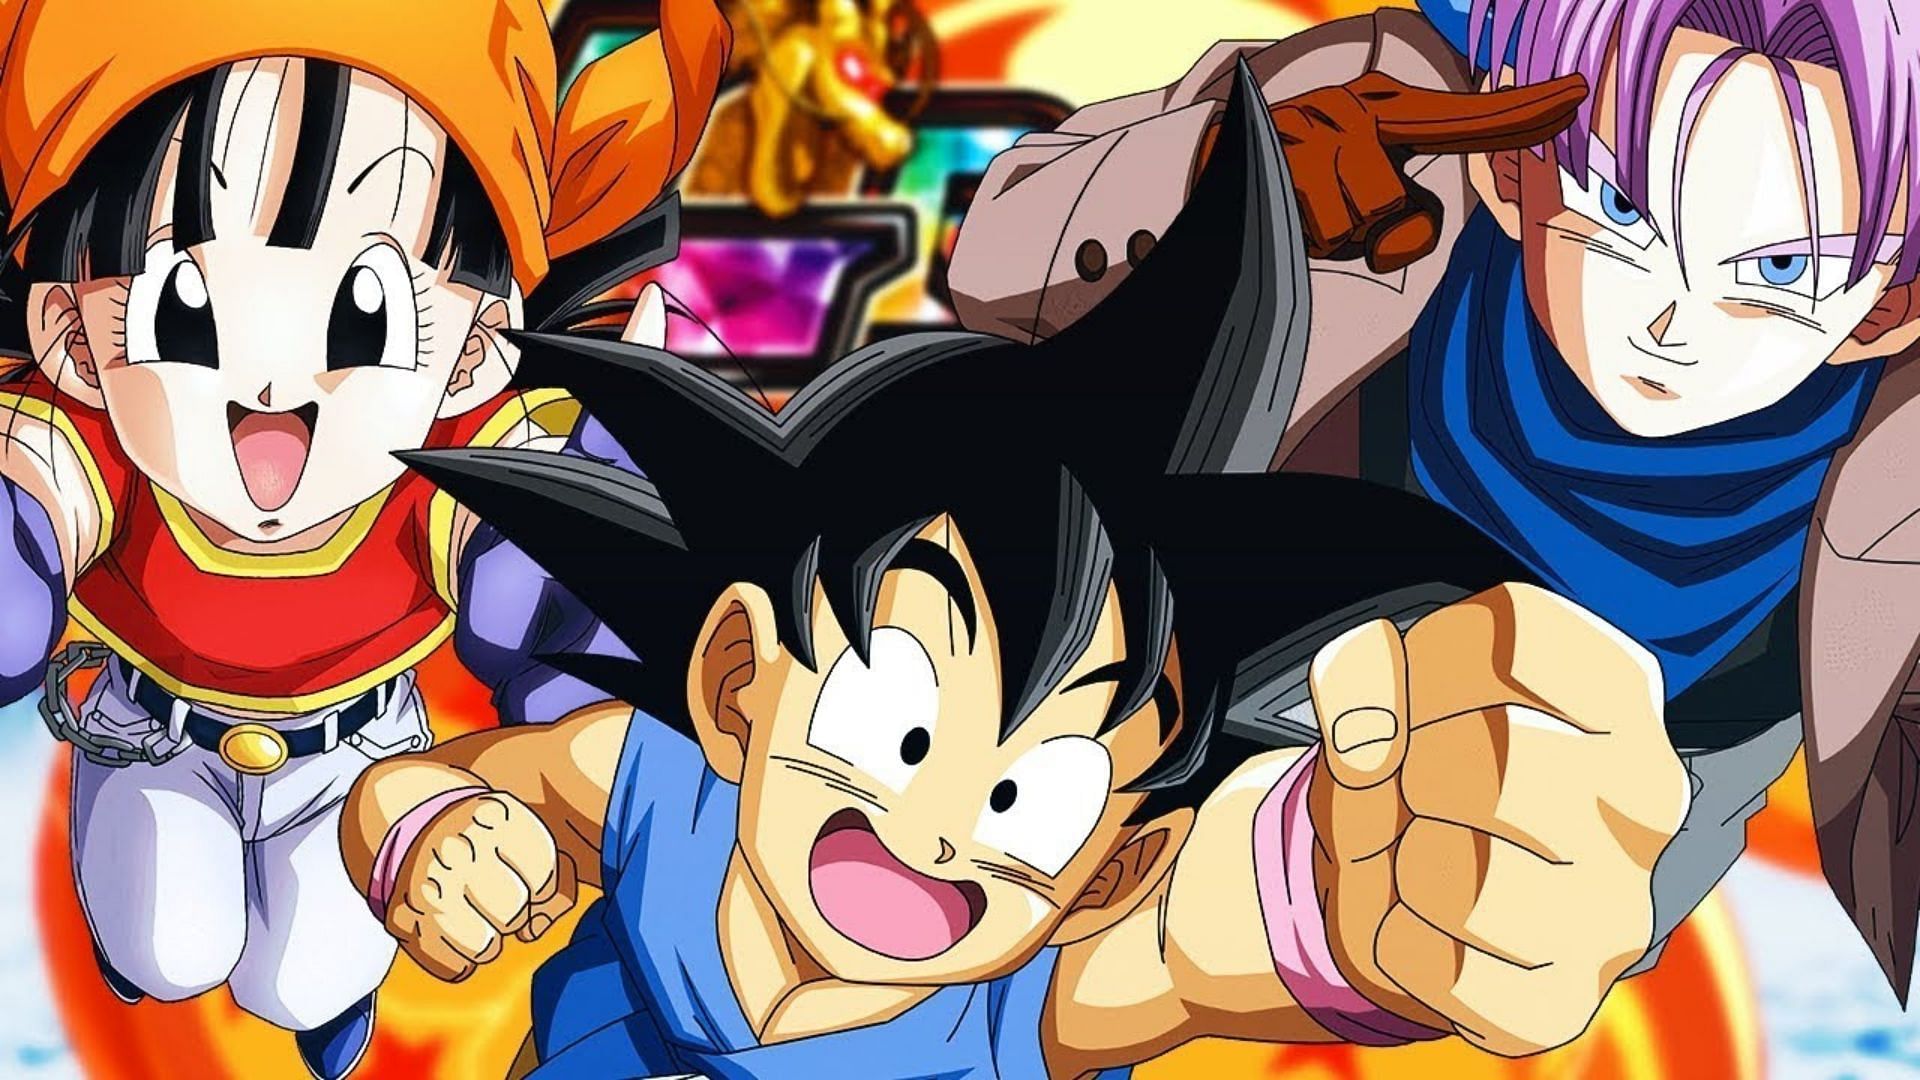 Pan, Goku, and Trunks as seen in Dragon Ball GT (Image via Toei Animation)